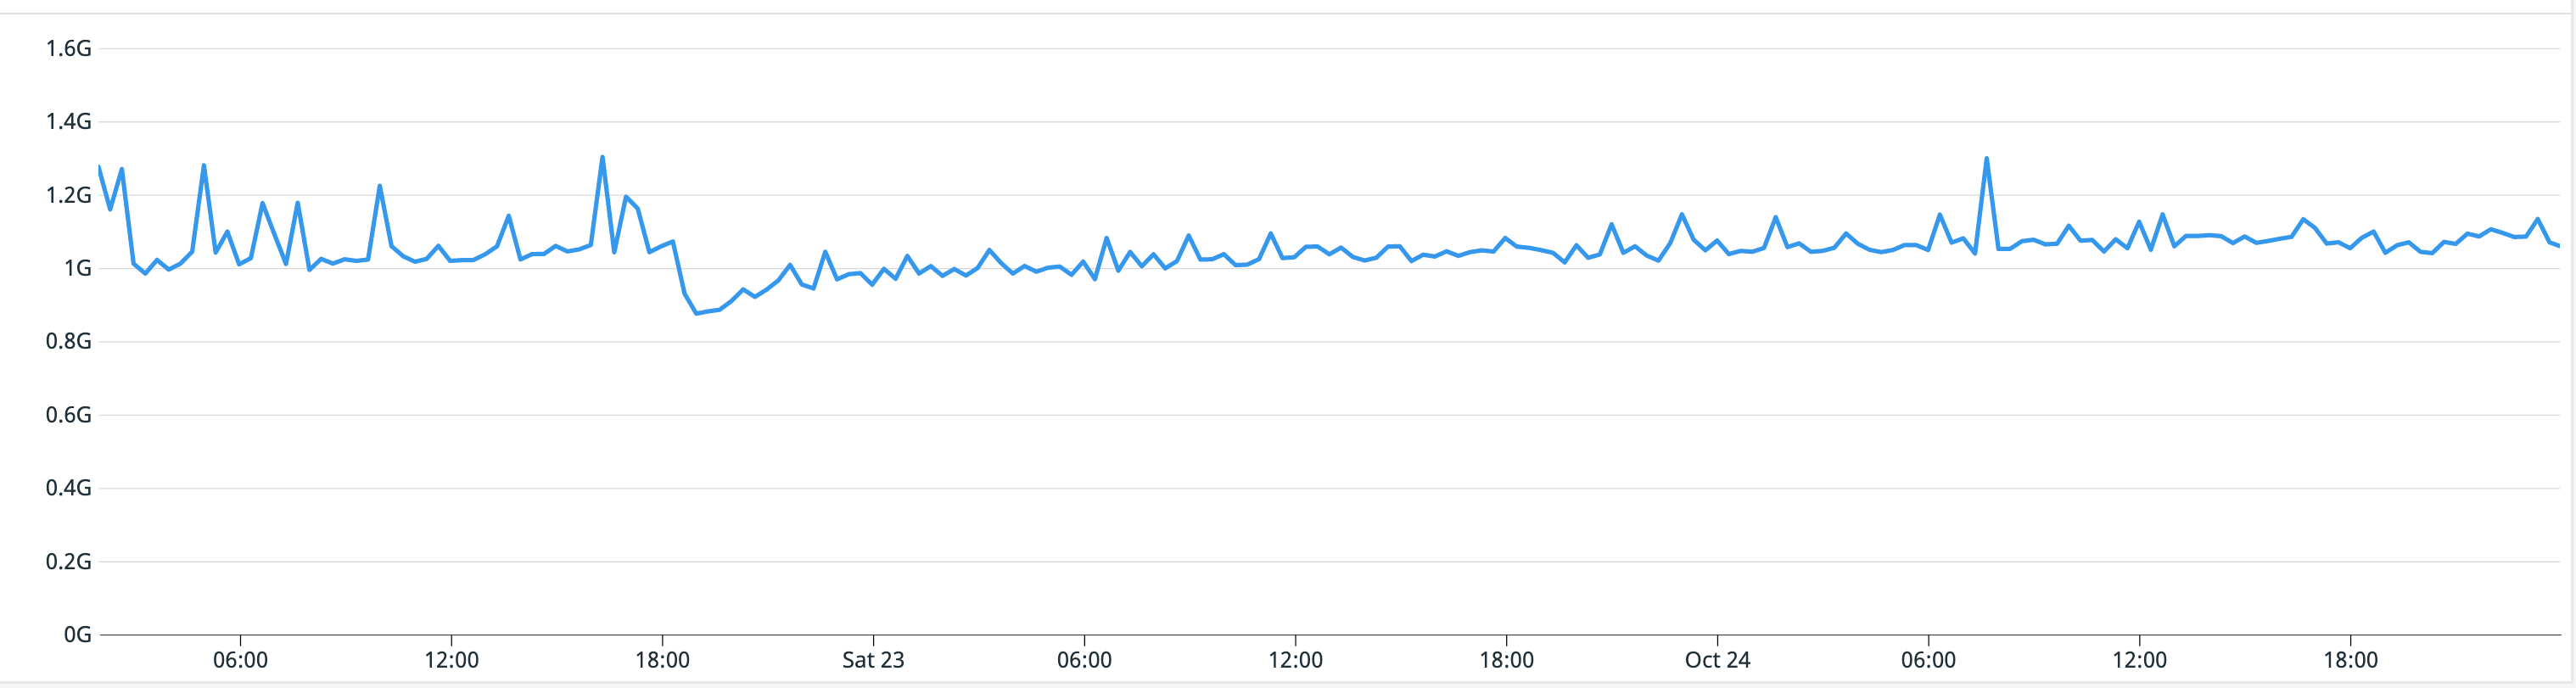 Memory usage graph after the memory leaks were fixed